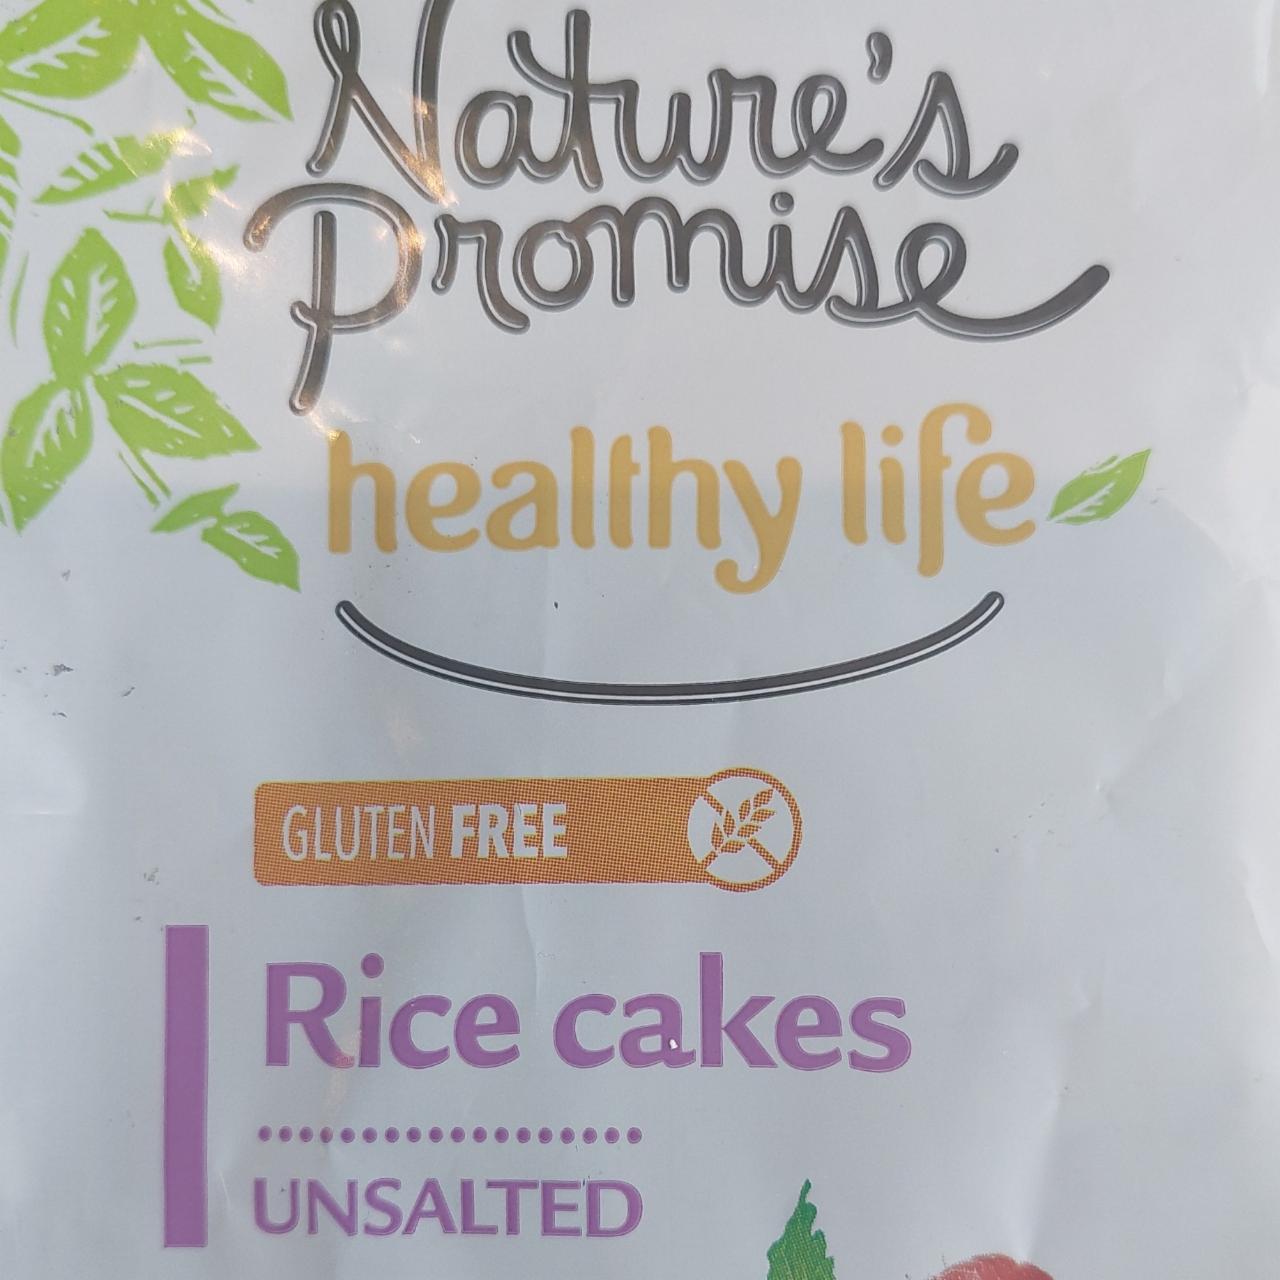 Fotografie - Rice cakes unsalted Nature's Promise